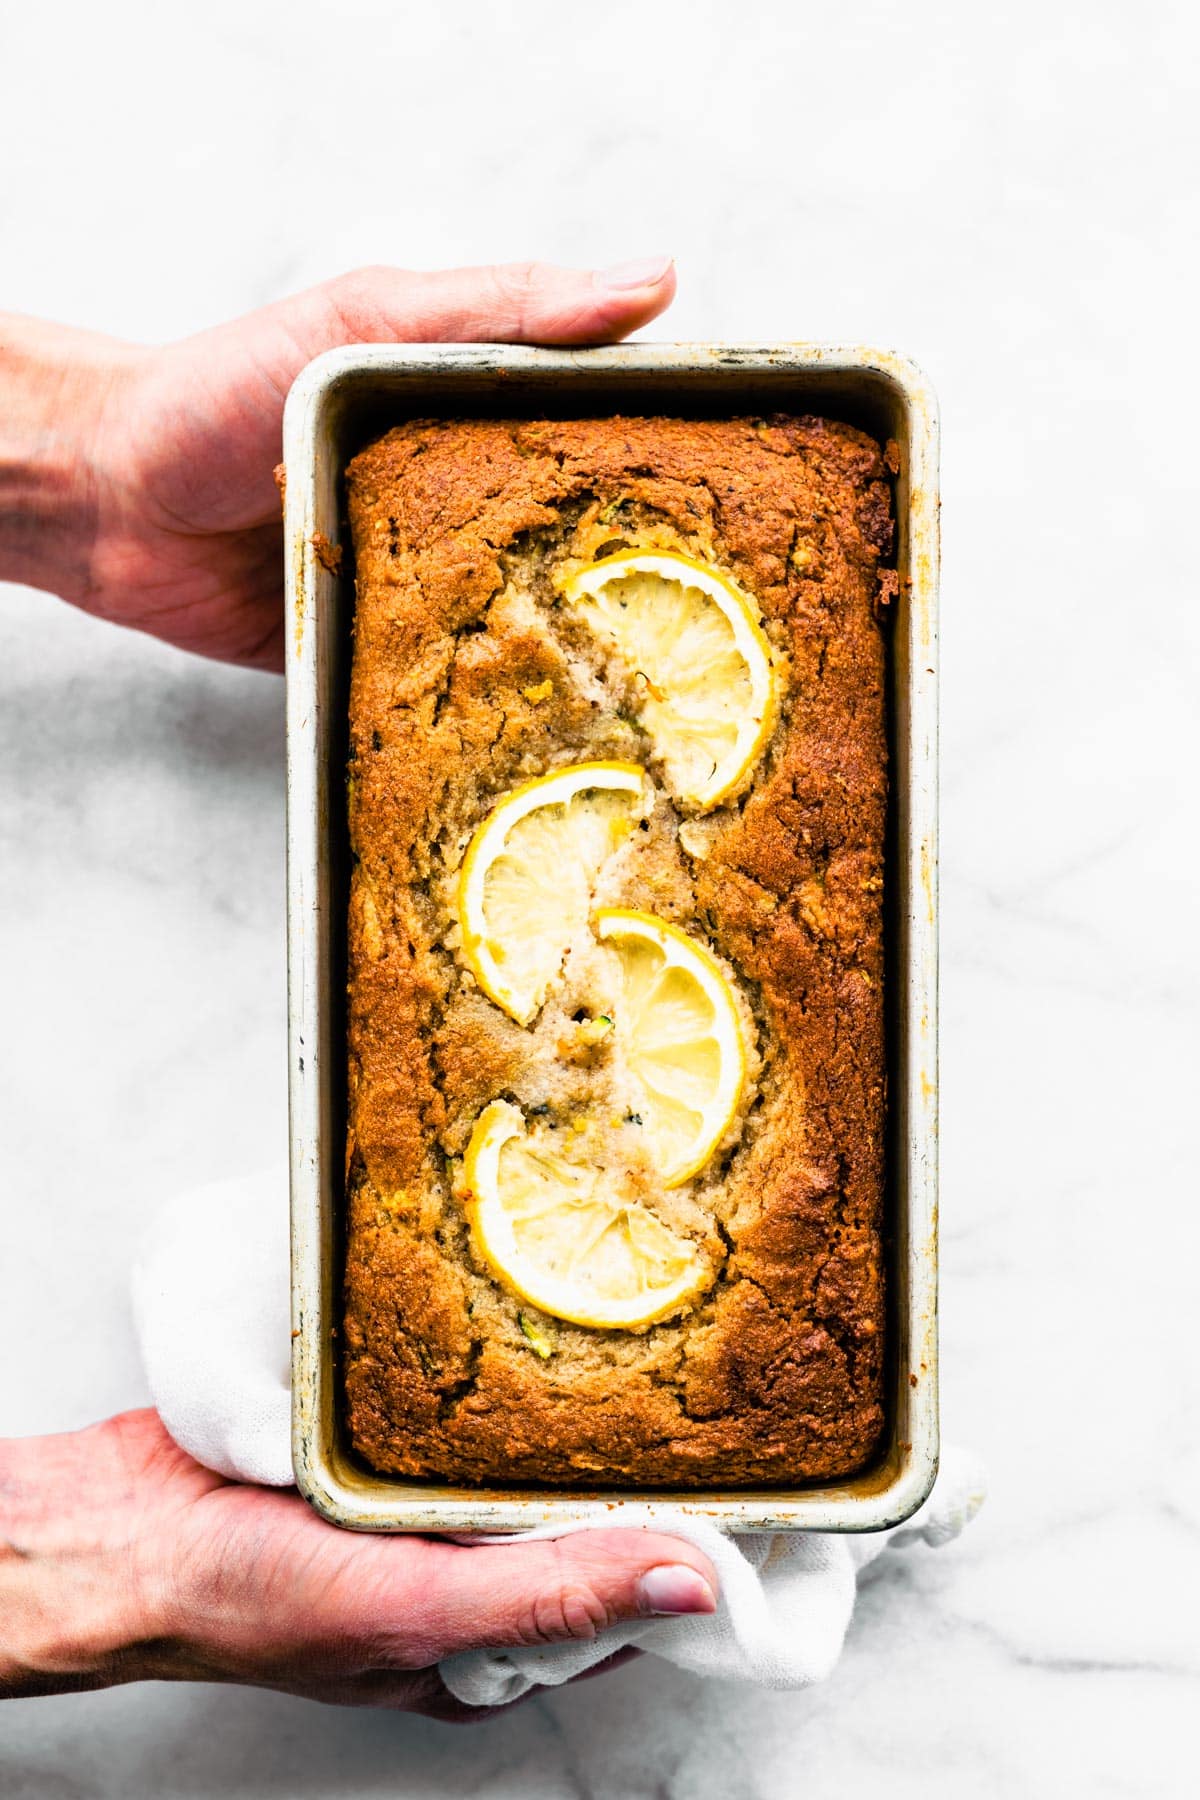 Two hands holding a baked loaf of lemon zucchini bread.